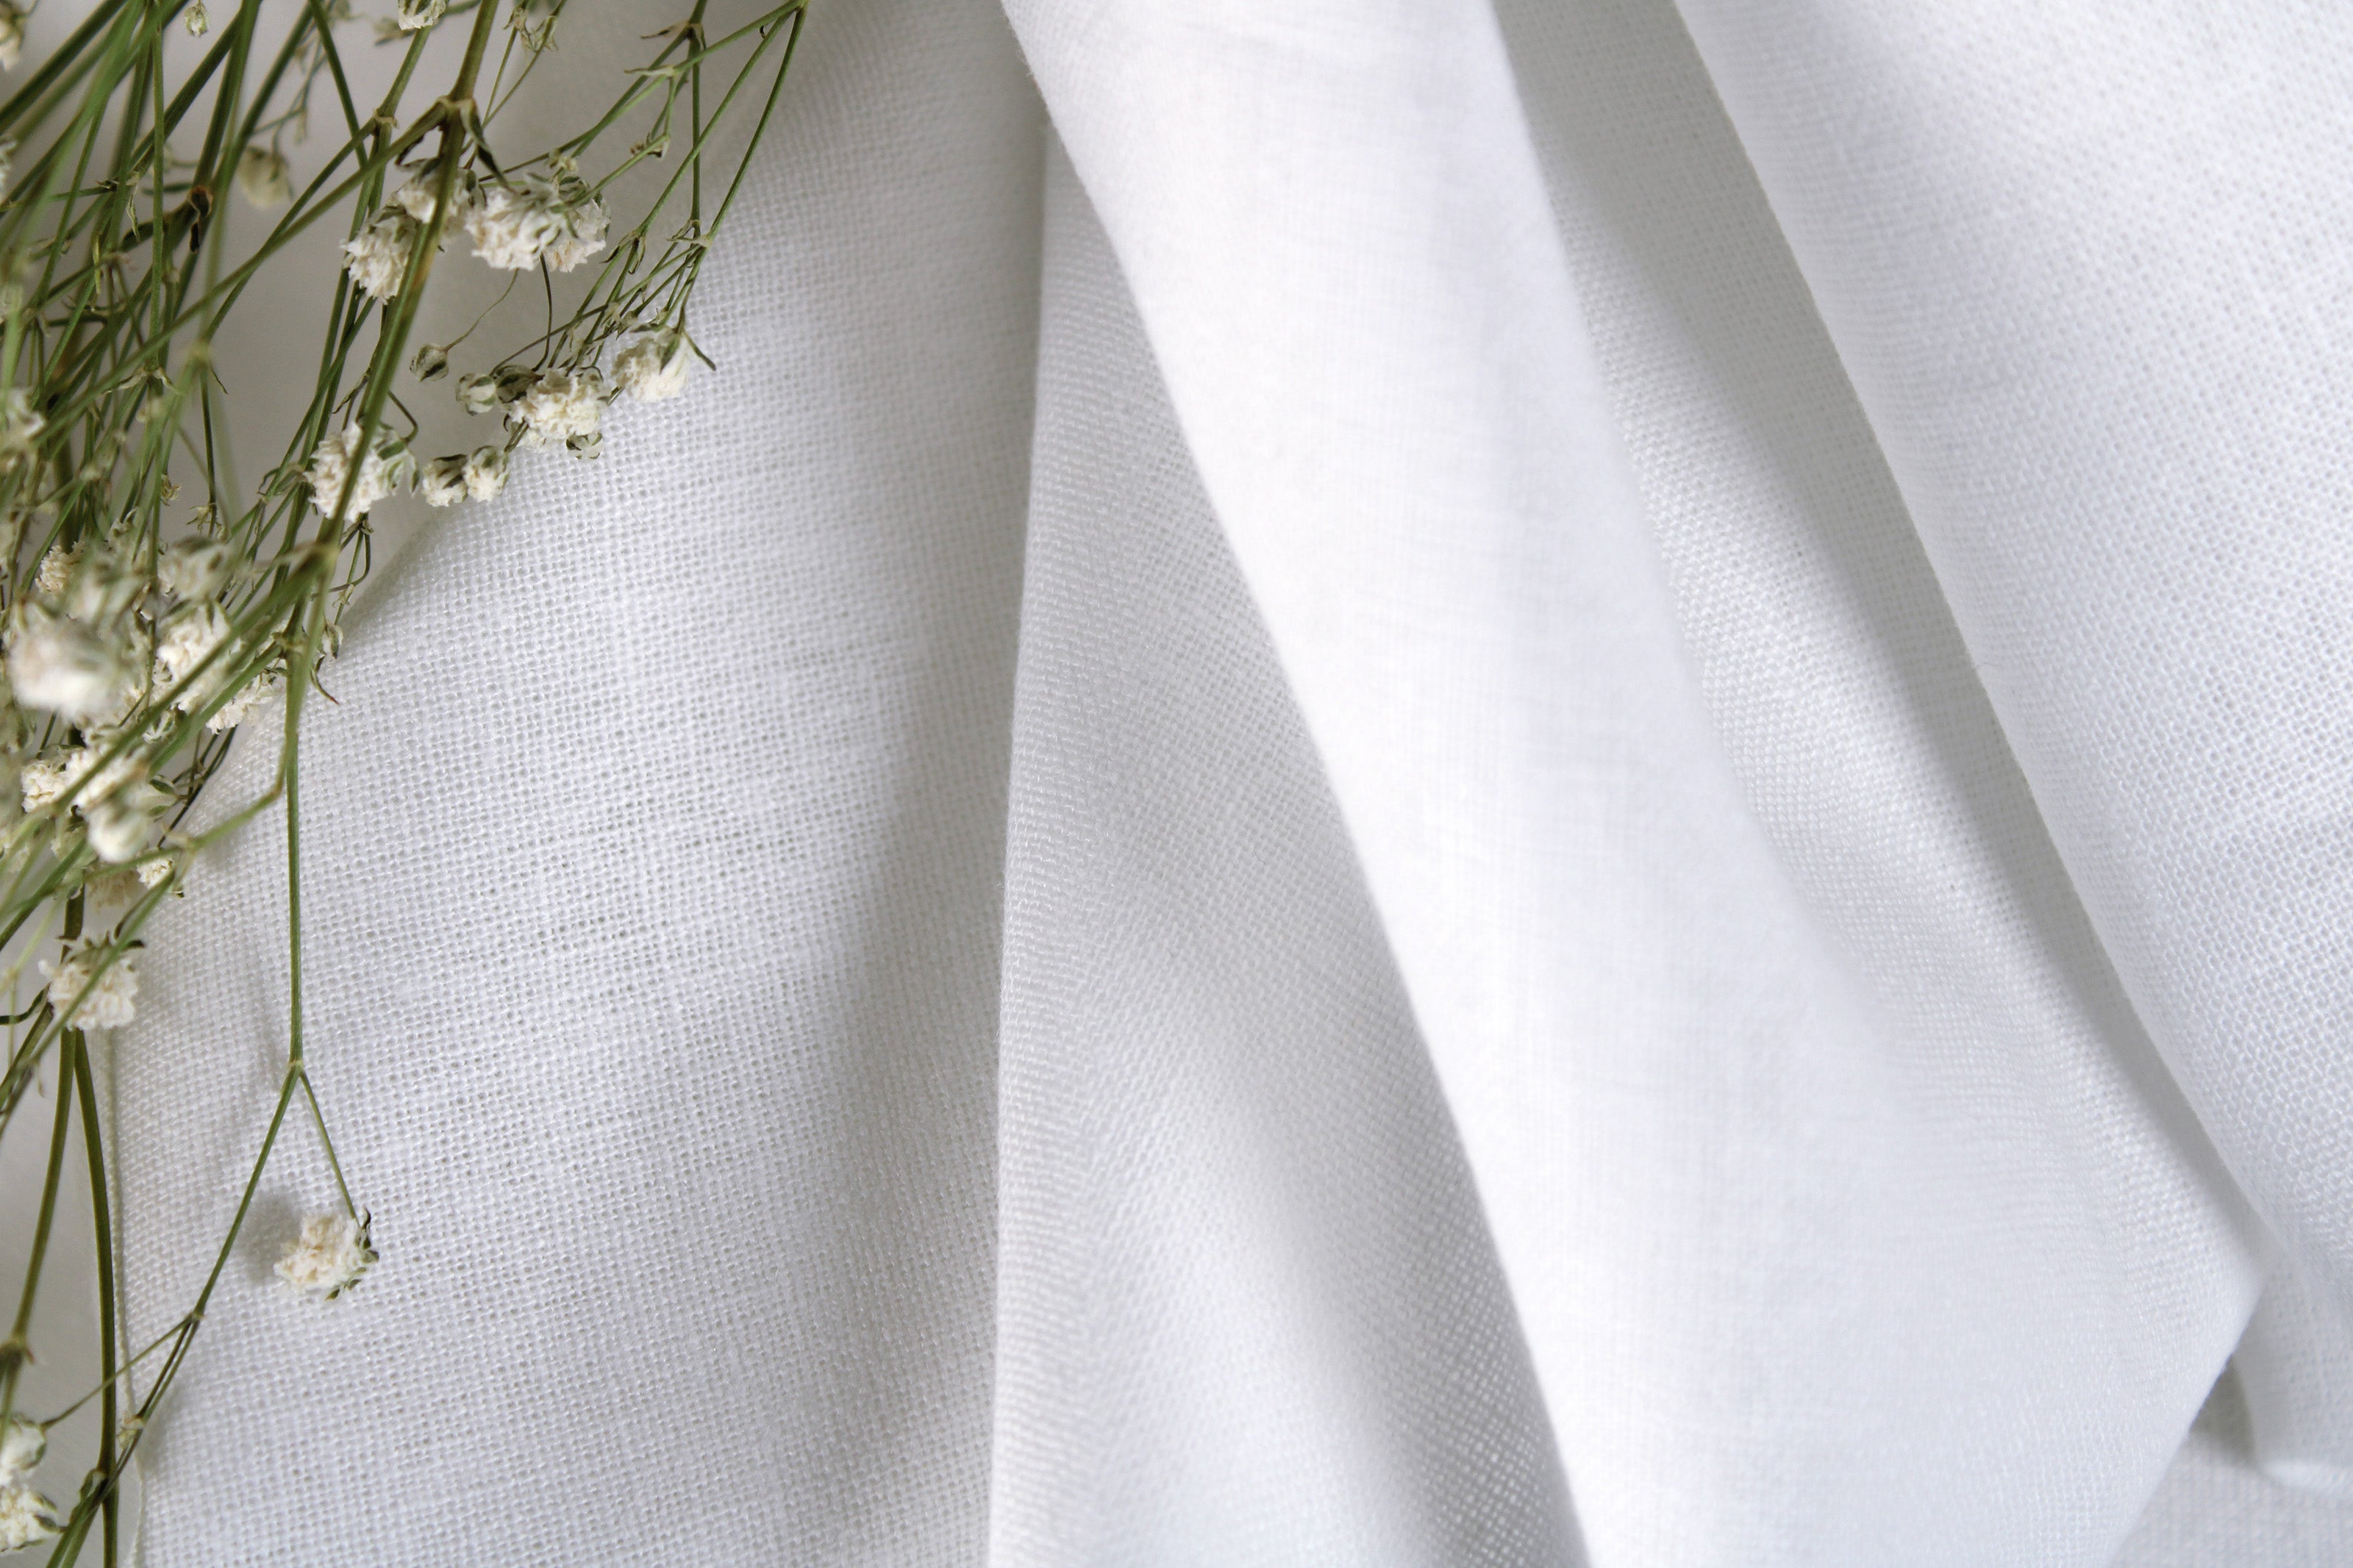 NEW LINEN FABRIC COLLECTION!!! / 100% Linen Fabric by the Yard / White Linen Fabric / Buy Linen Online